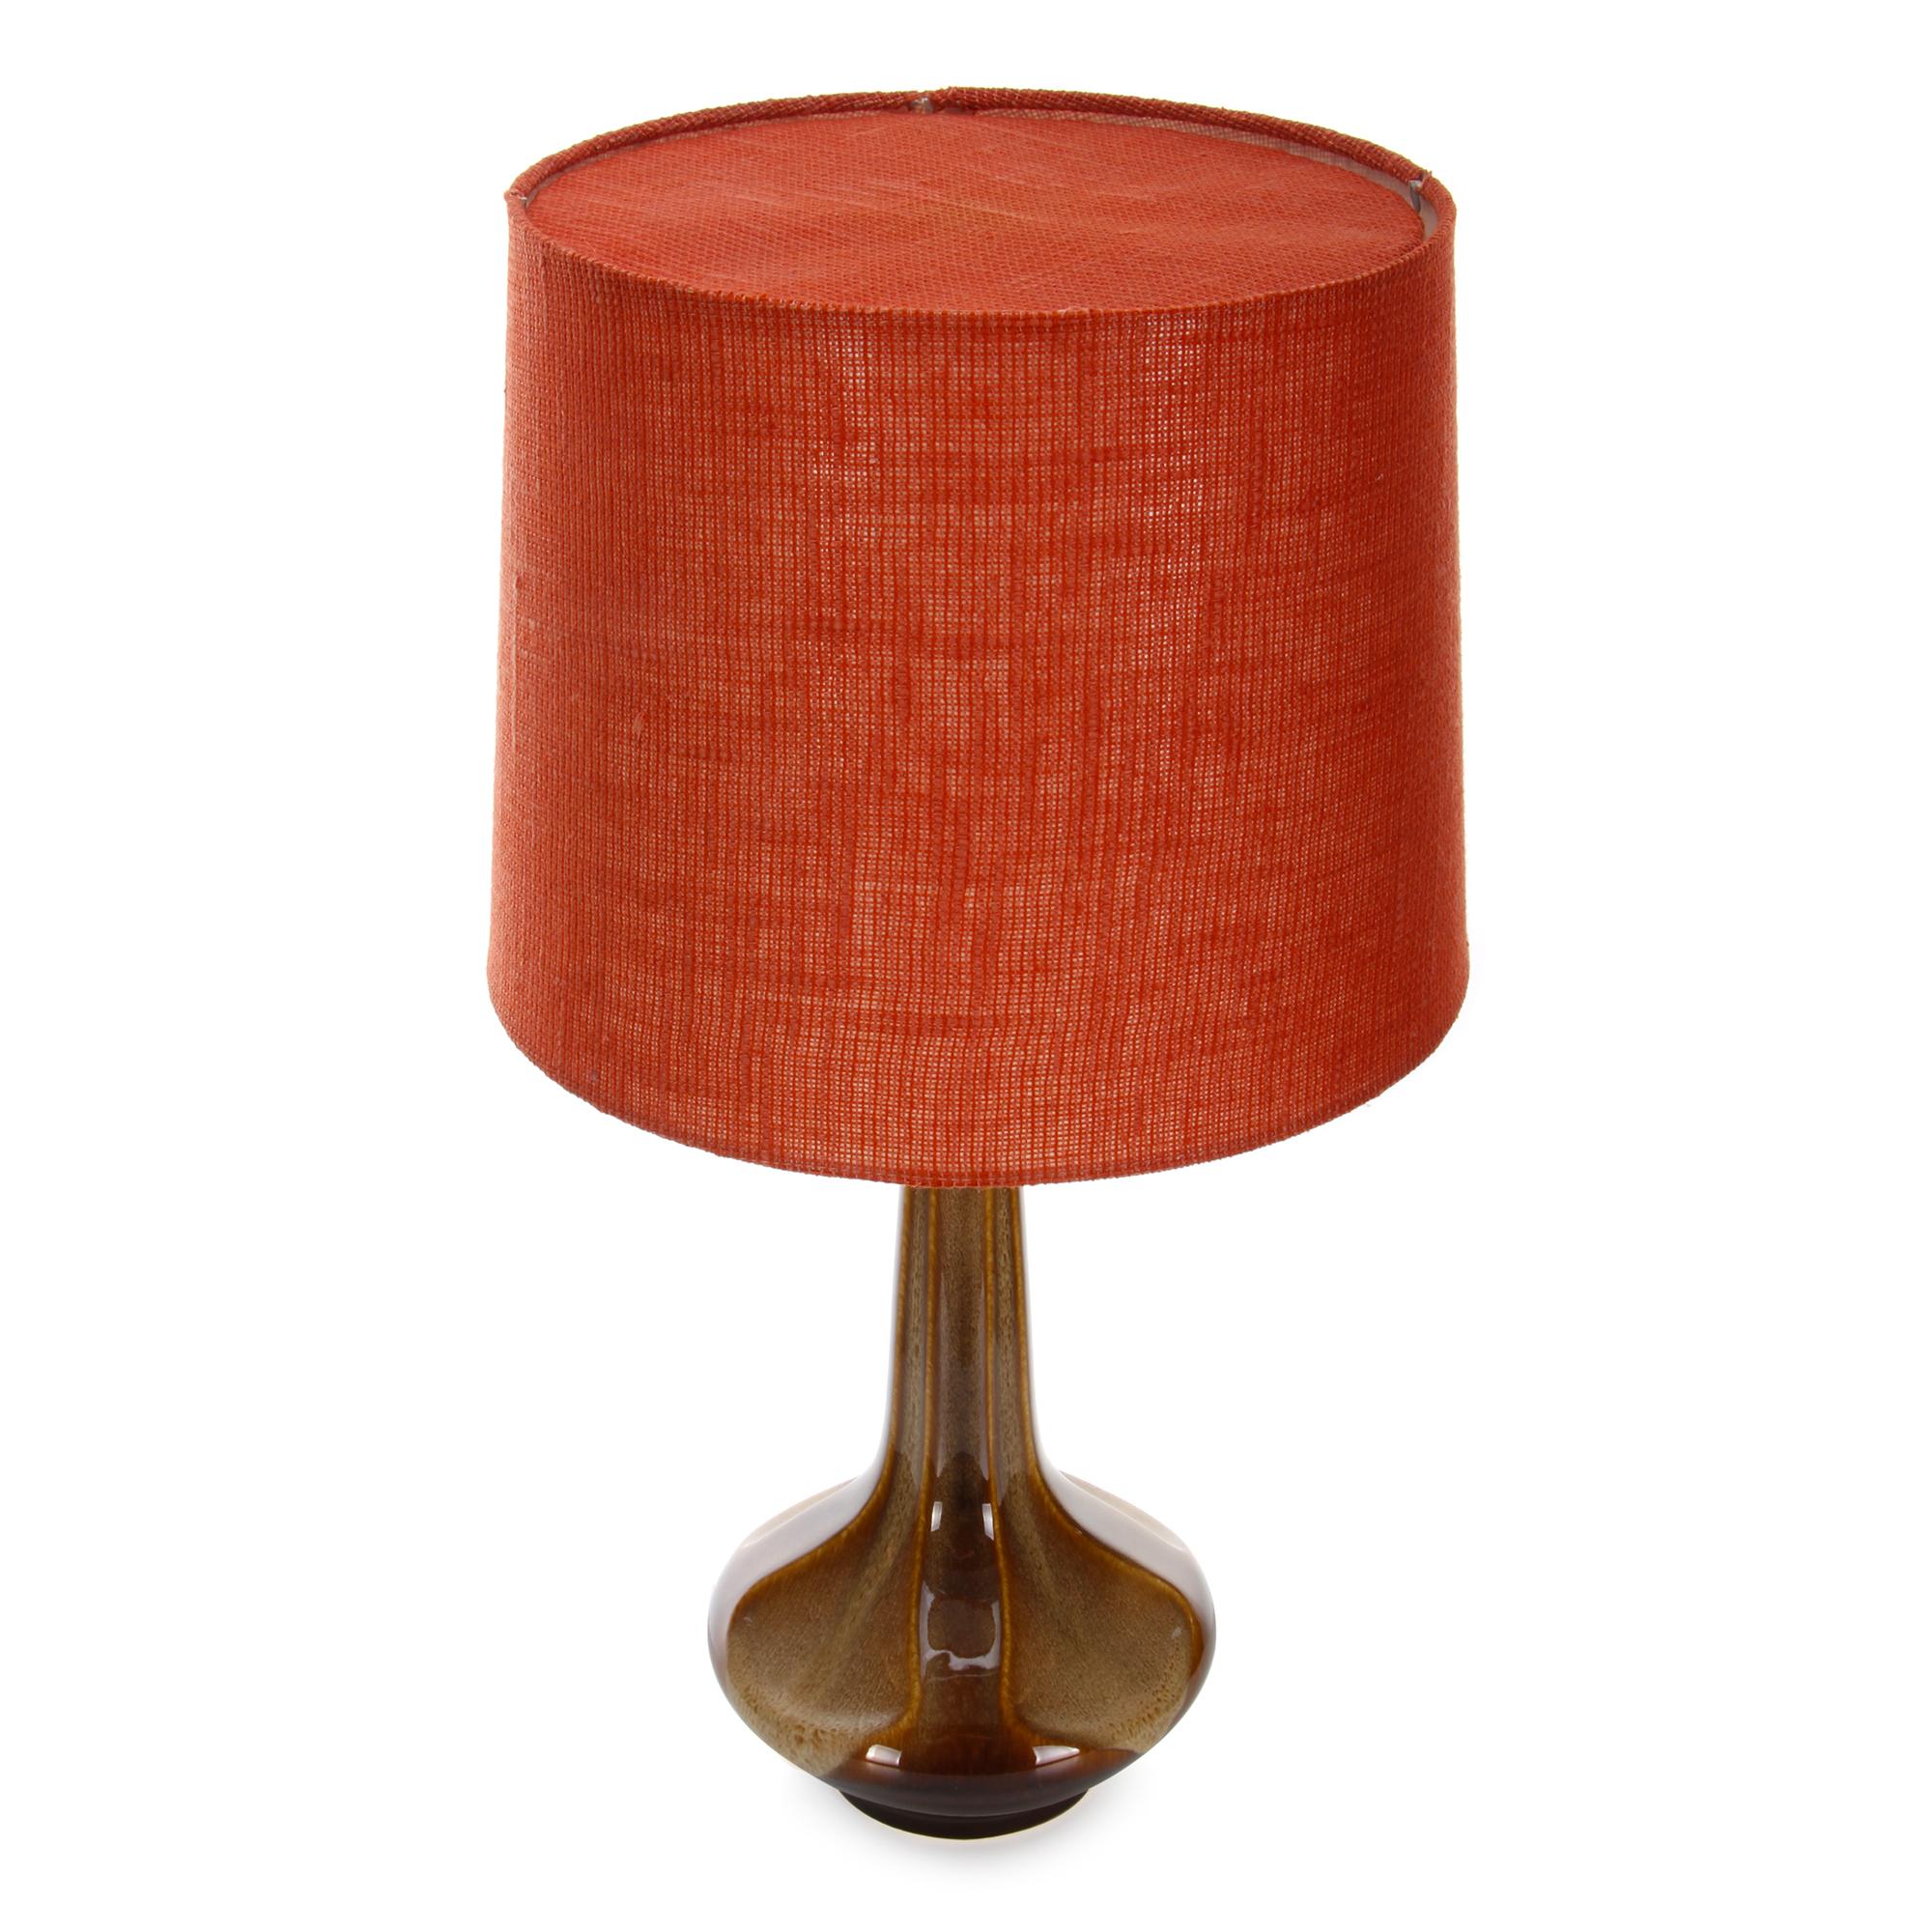 Glazed Large Brown Table Lamp by Einar Johansen for Soholm 1960s, with Vintage Shade